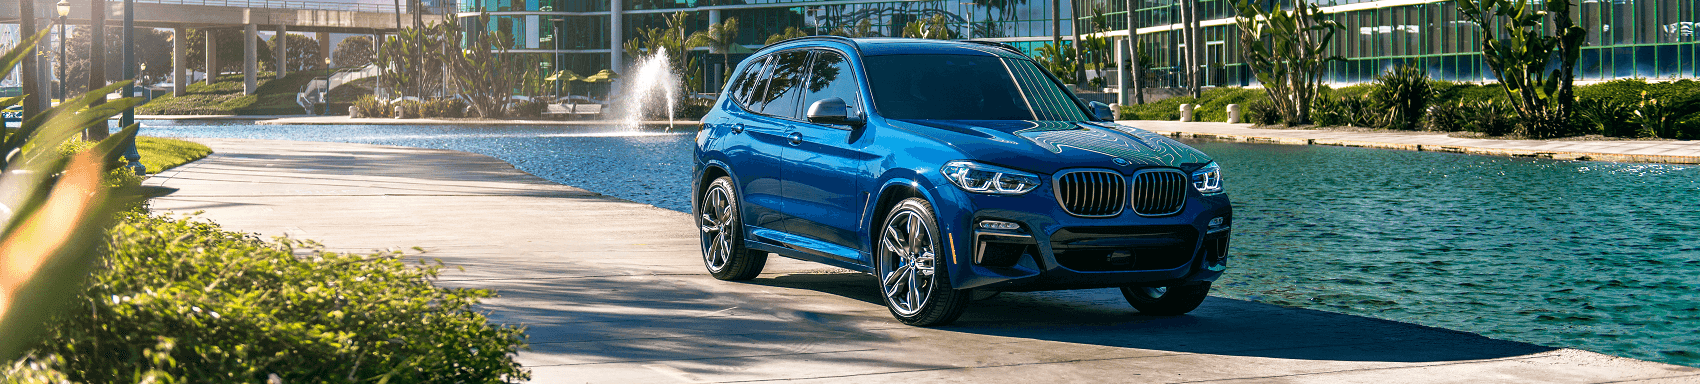 BMW X3 Specs and Dimensions 